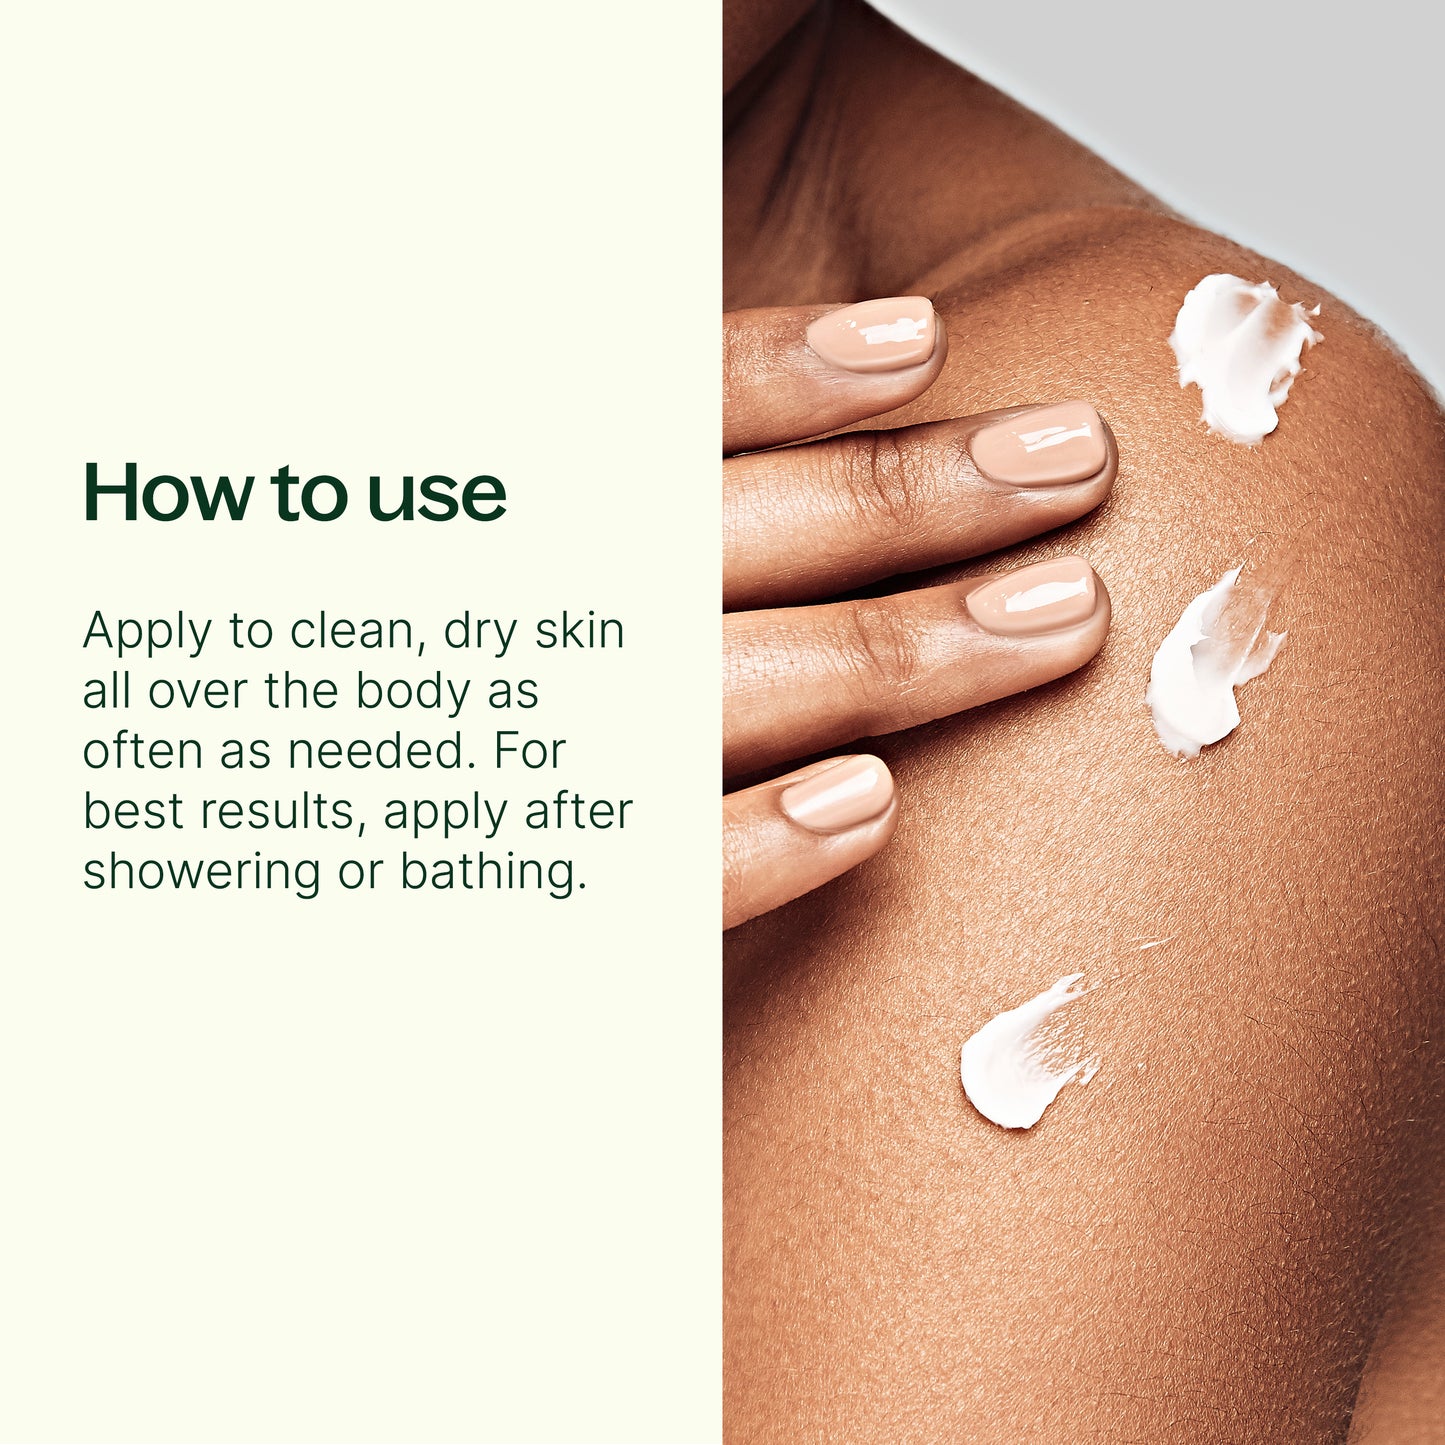 how to use: apply to clean dry skin all over the boddy as often as needed. For best results, apply after showering